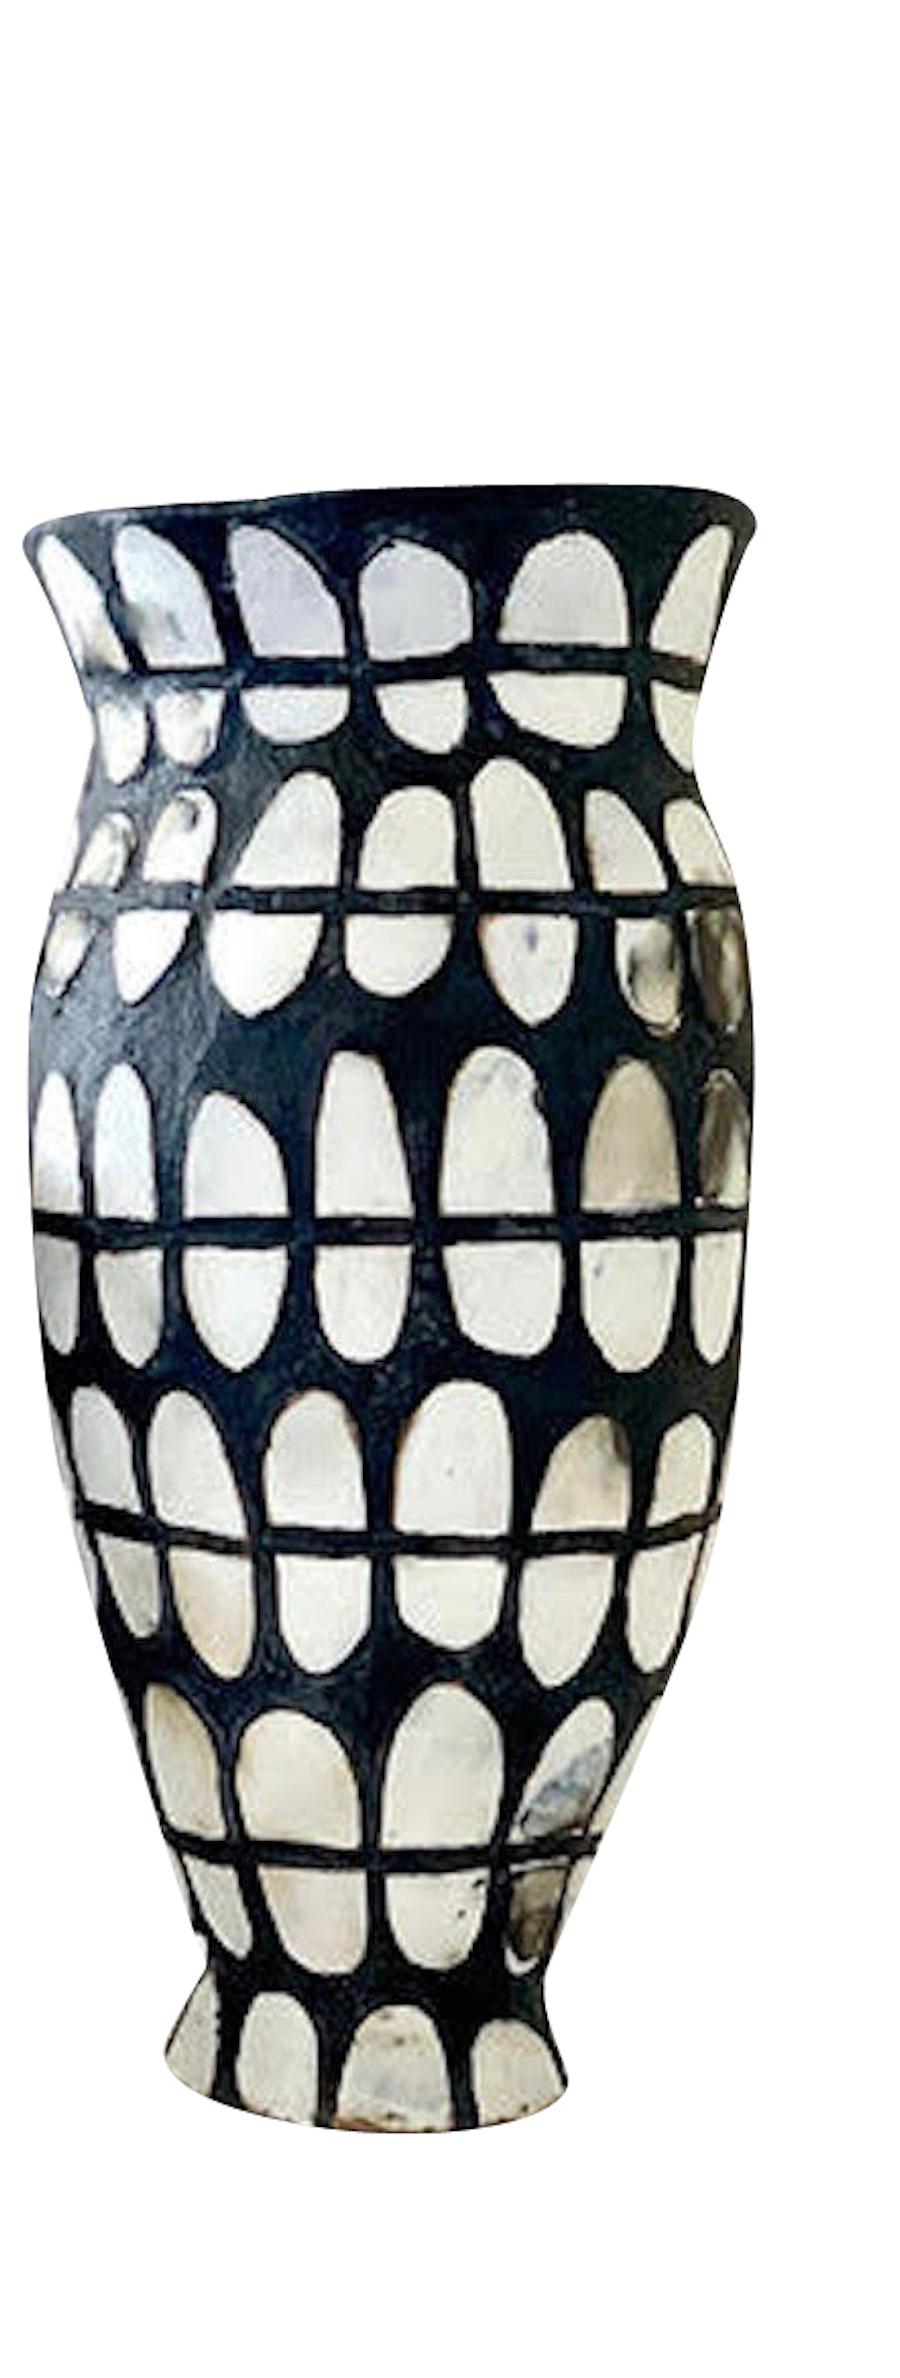 Contemporary American ceramicist Brenda Holzke hand made unique one of a kind stoneware vase made of porcelain design and black oxide stain.
Low with open mouth shape.